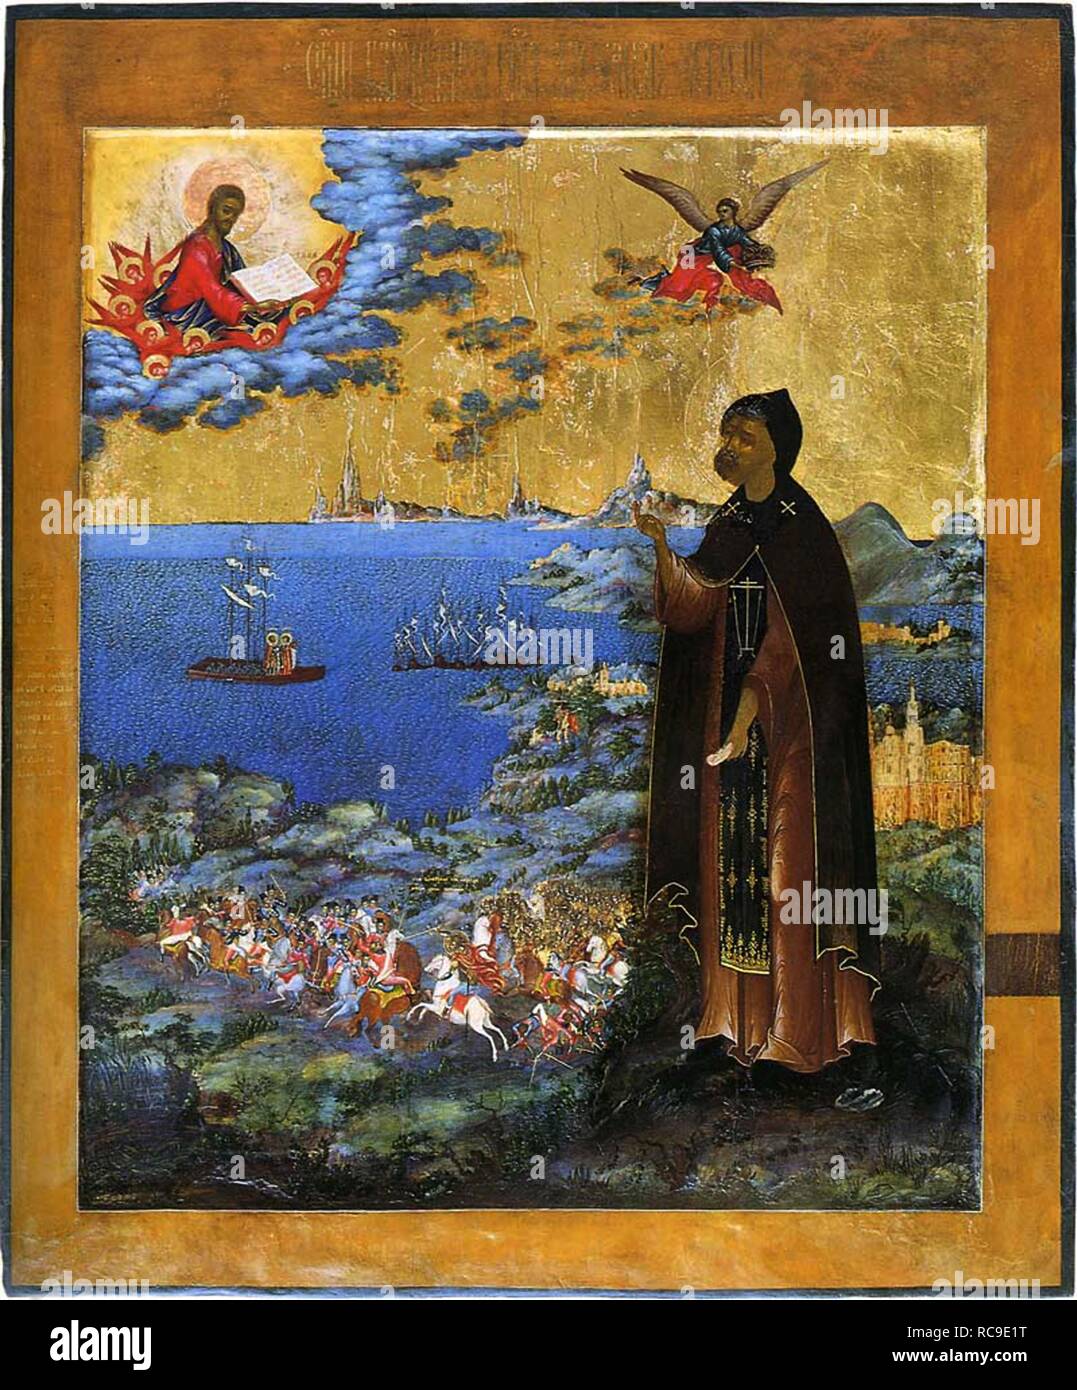 Saint Alexander Nevsky with Scenes from His Life. Museum: State Art Museum, Yekaterinburg. Author: Russian icon. Stock Photo